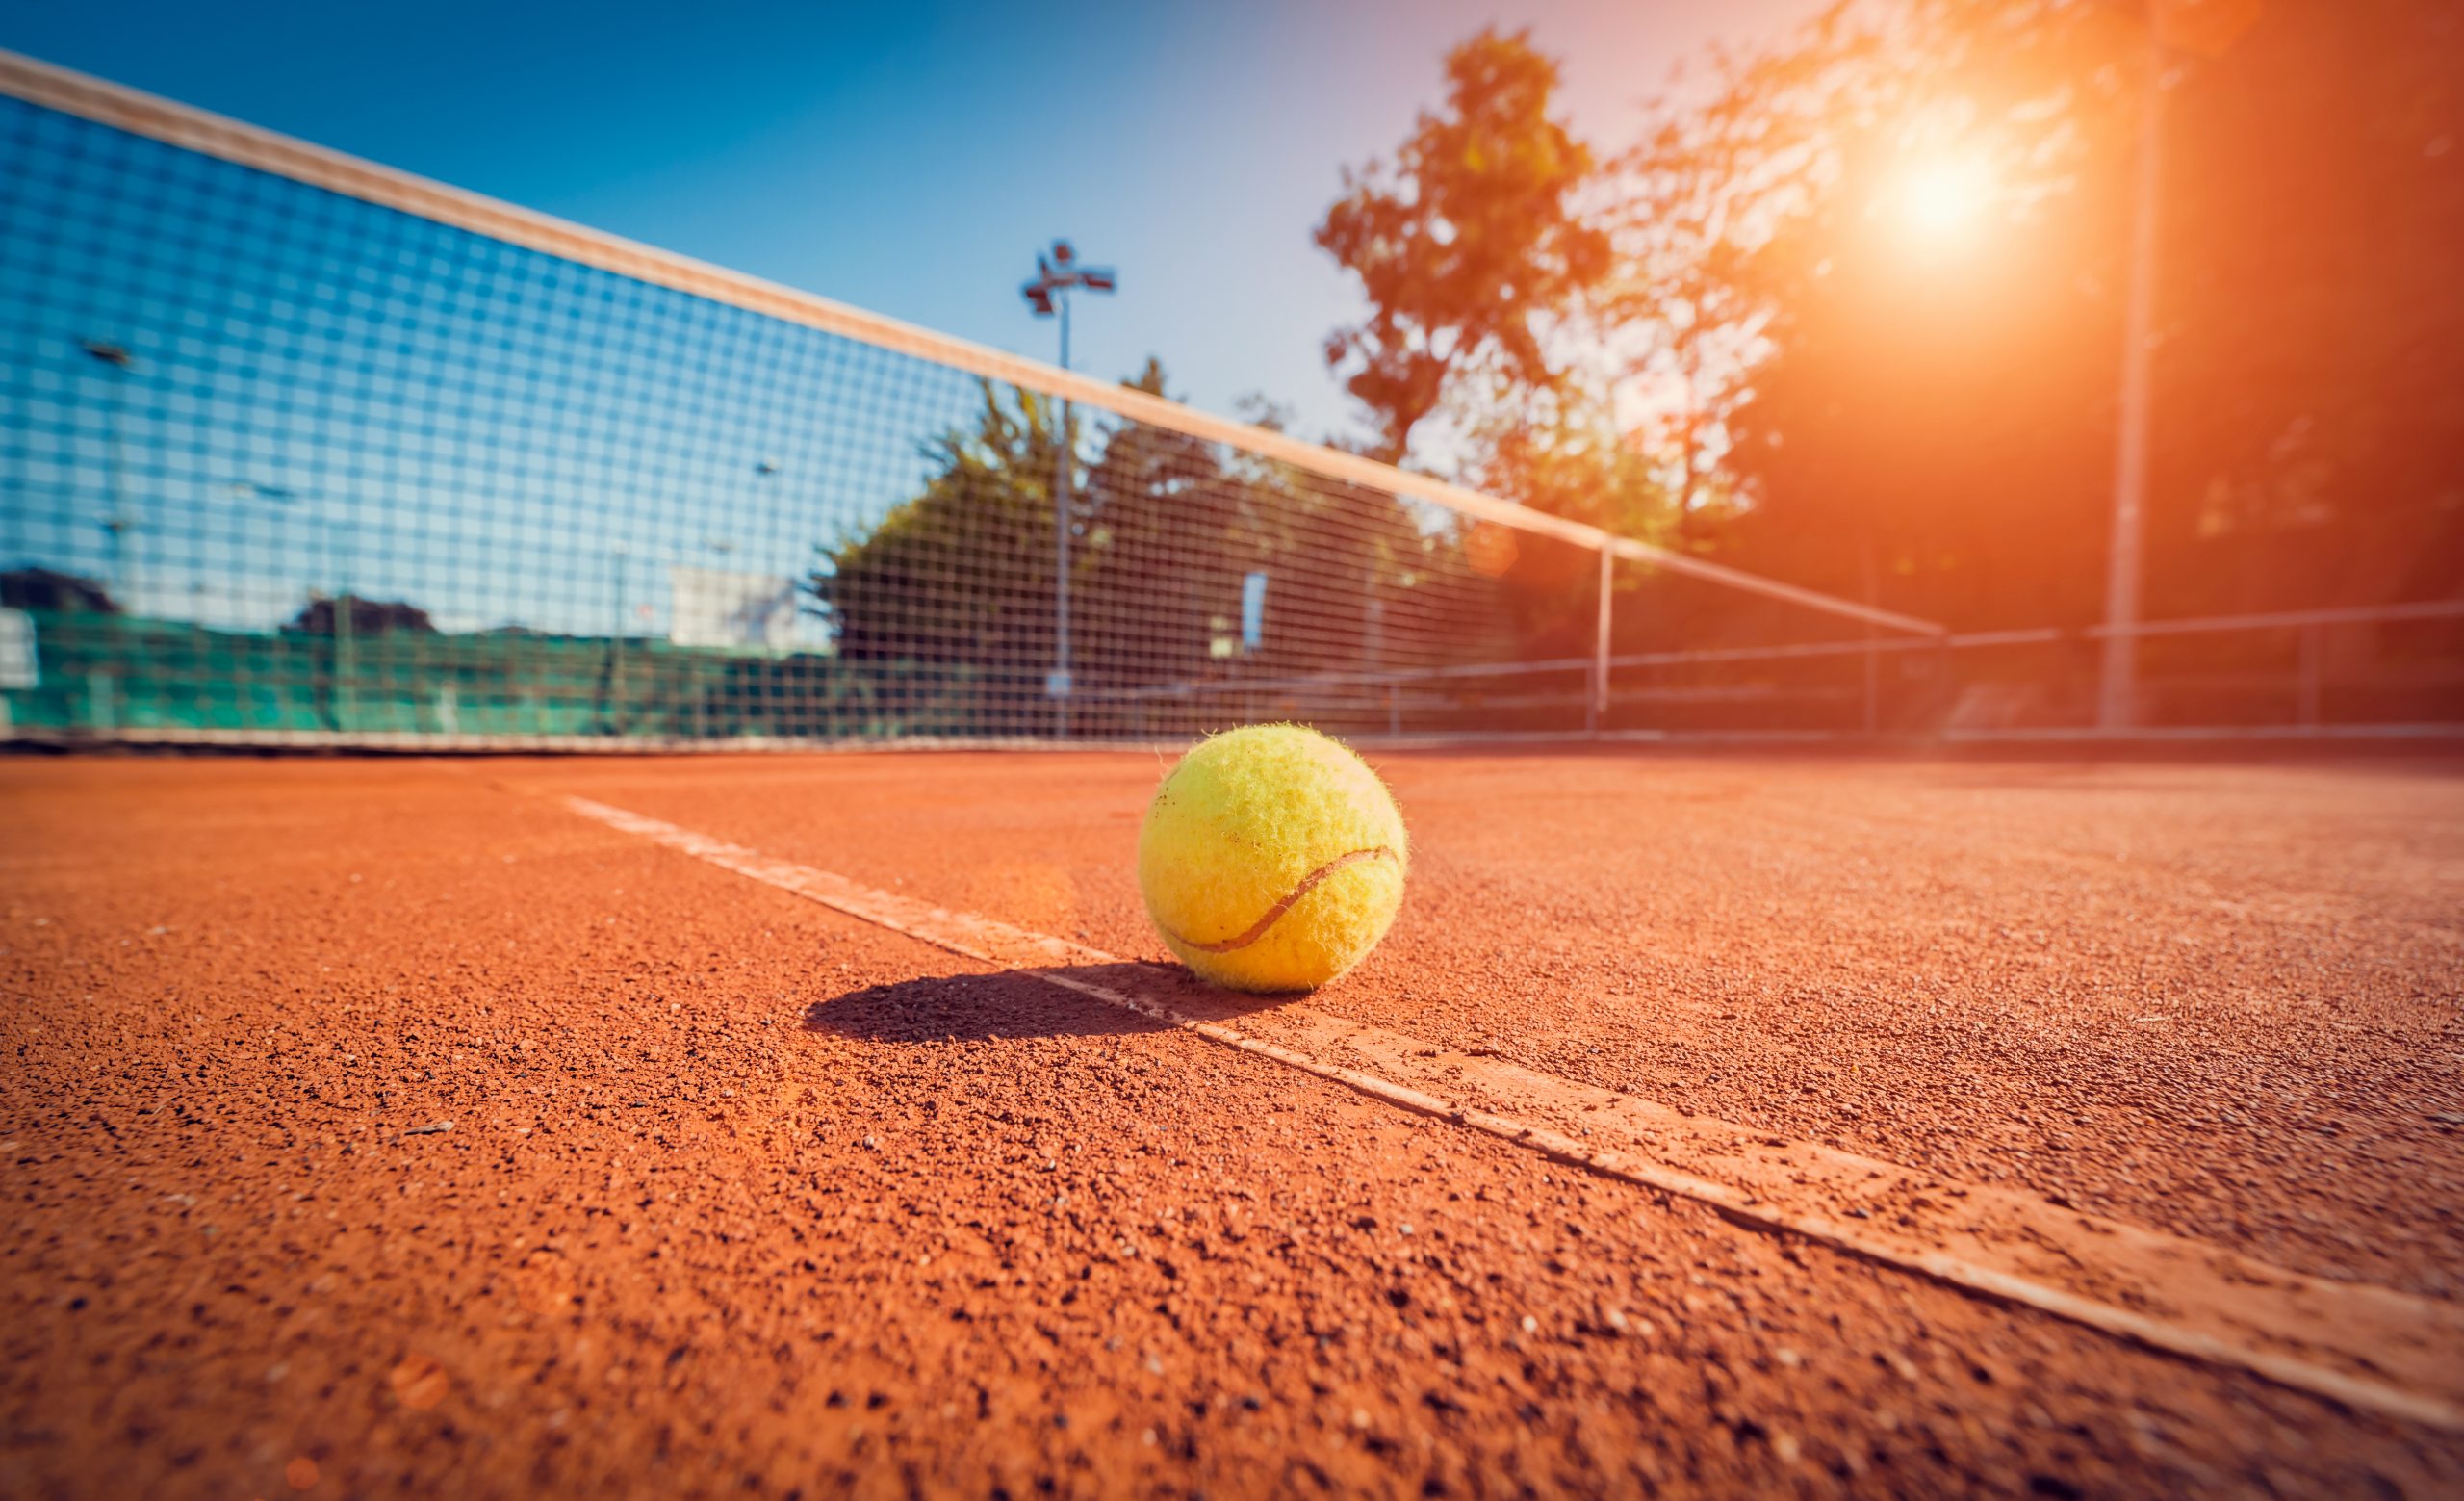 Wide angle close-up photograph of tennis ball on court during sunset. Competitive individual sports concept.